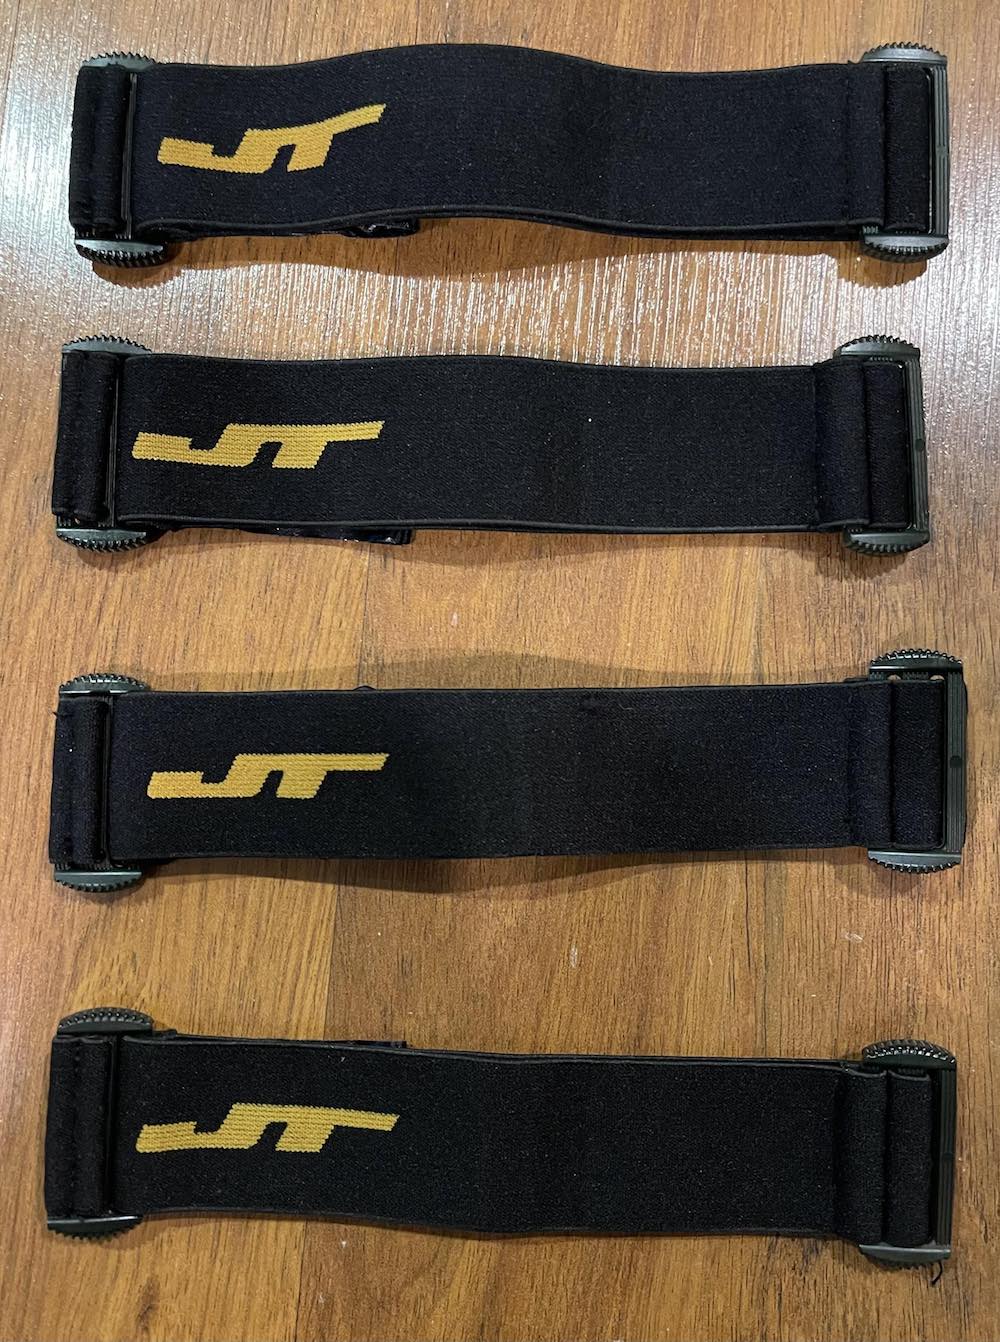 JT Standard Issue Woven Strap Black with Gold JT logo